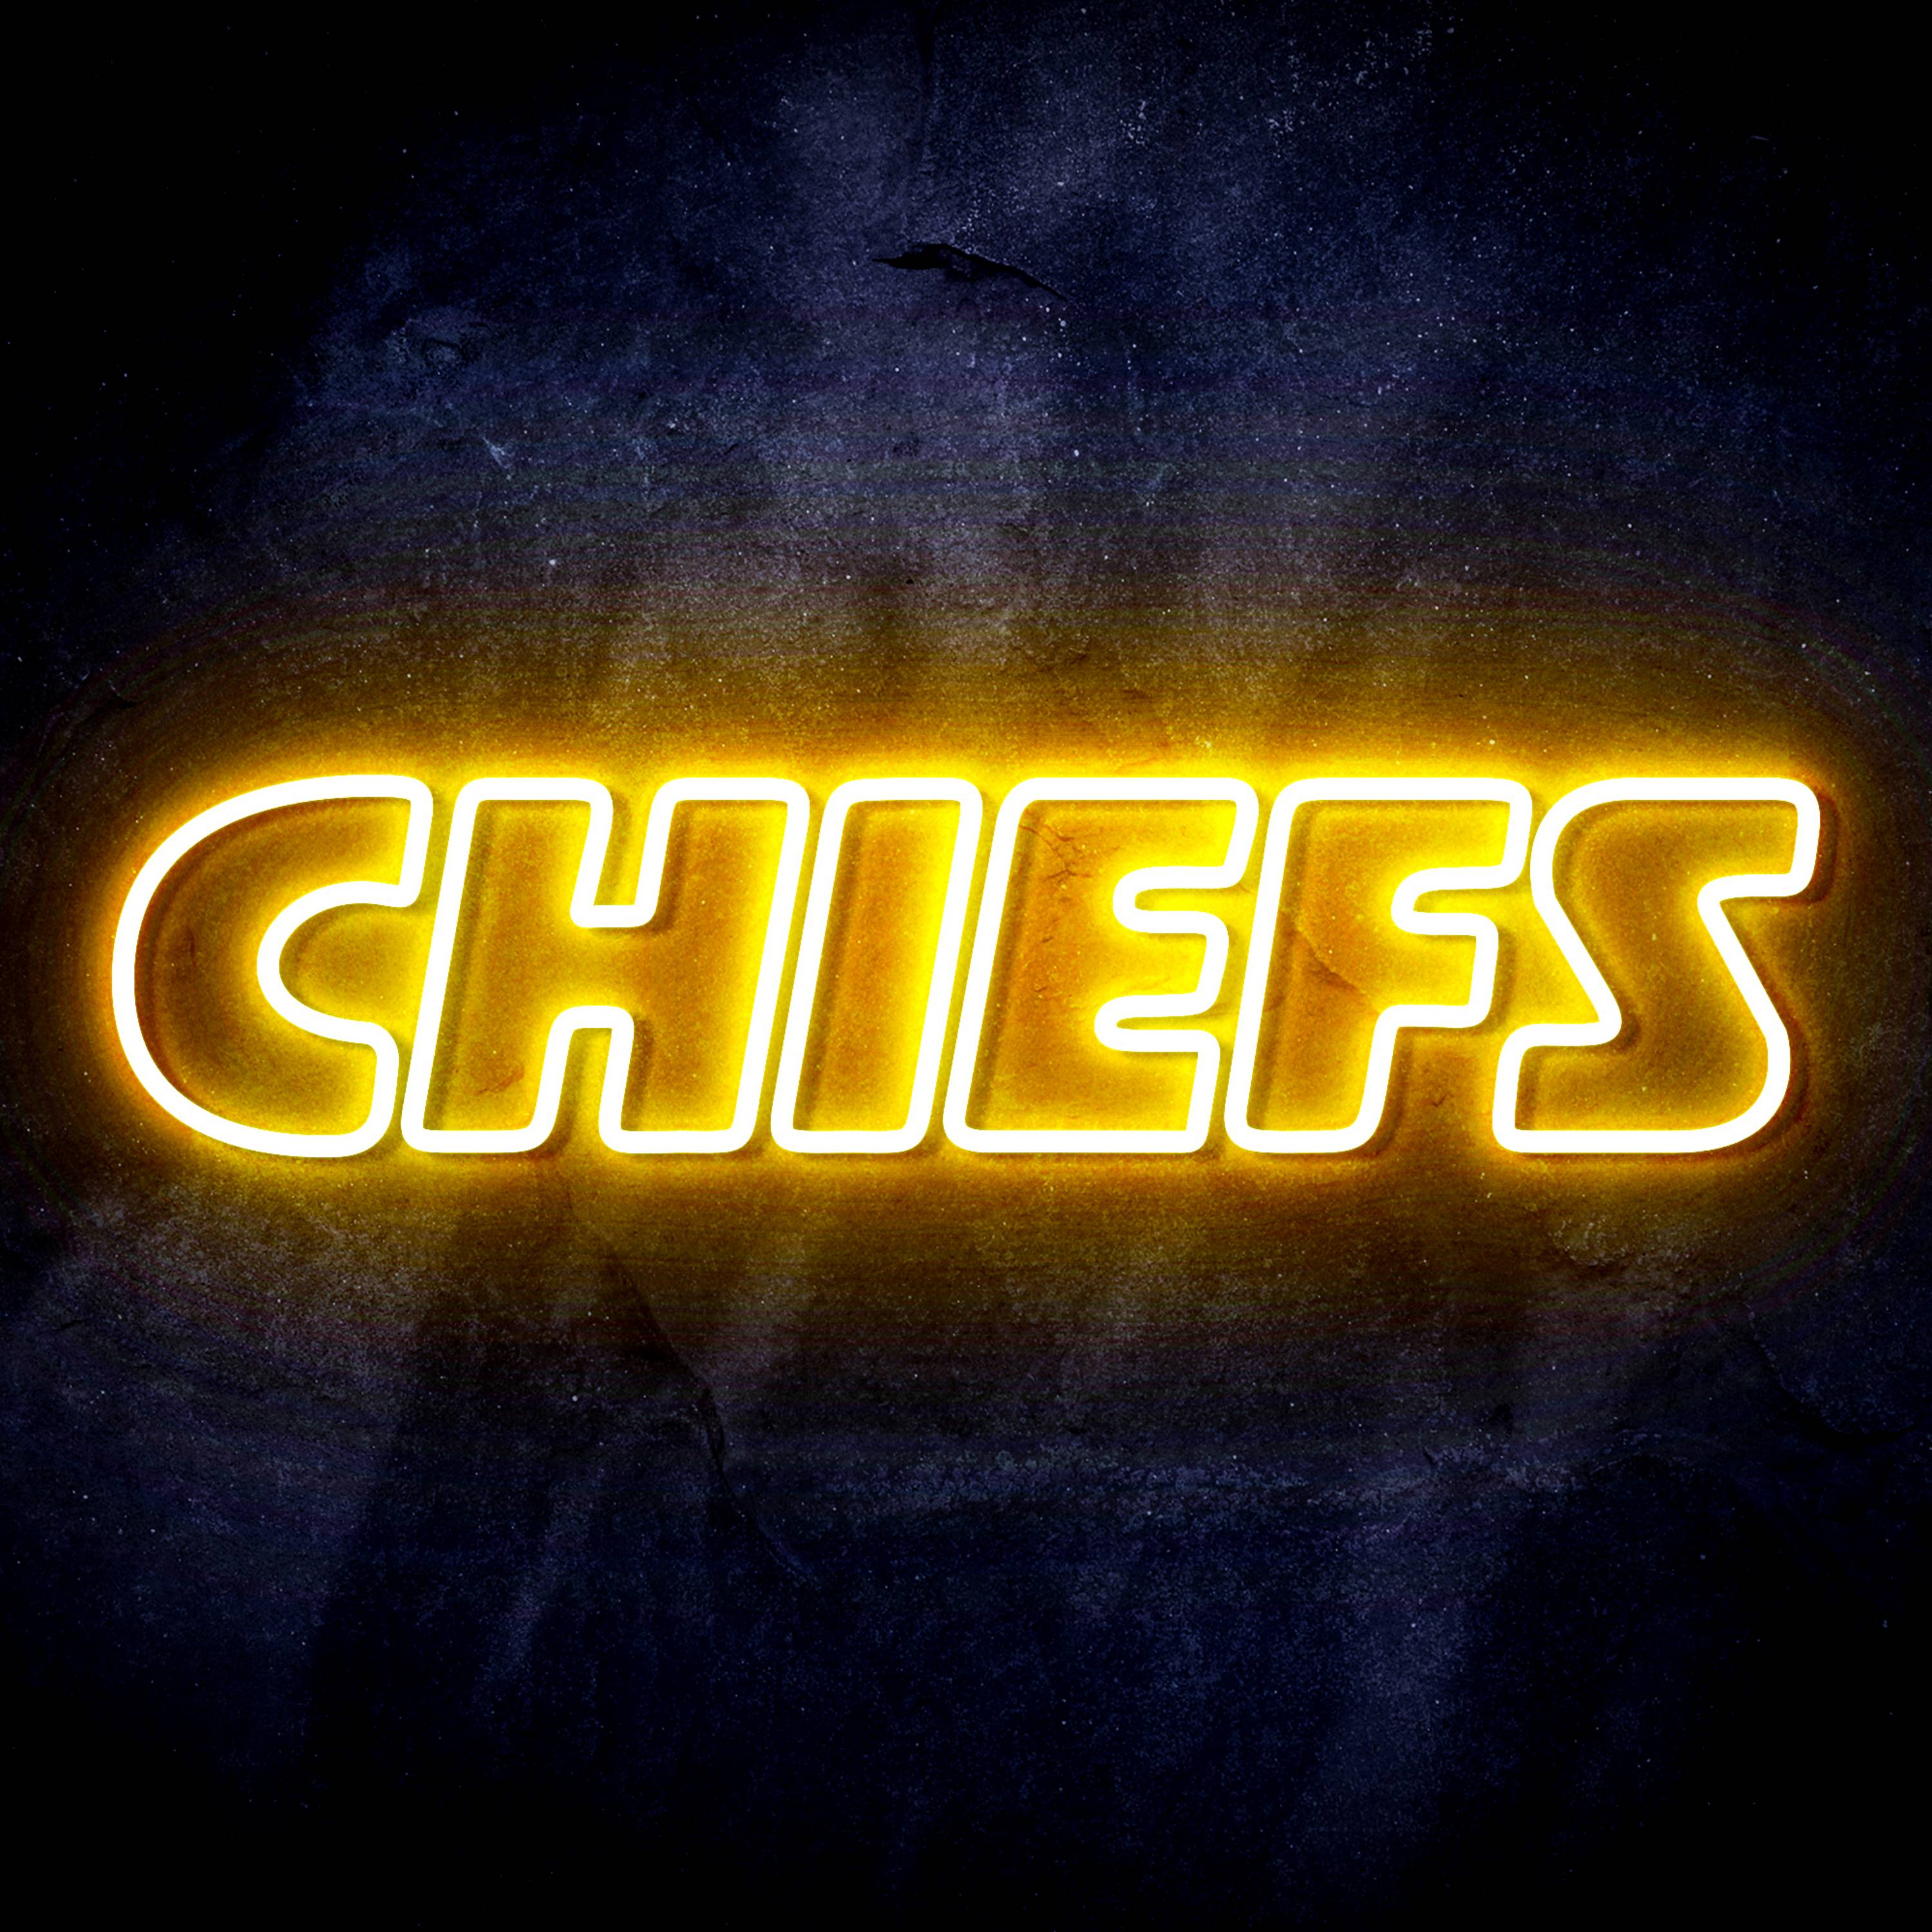 NFL CHIEFS LED Neon Sign